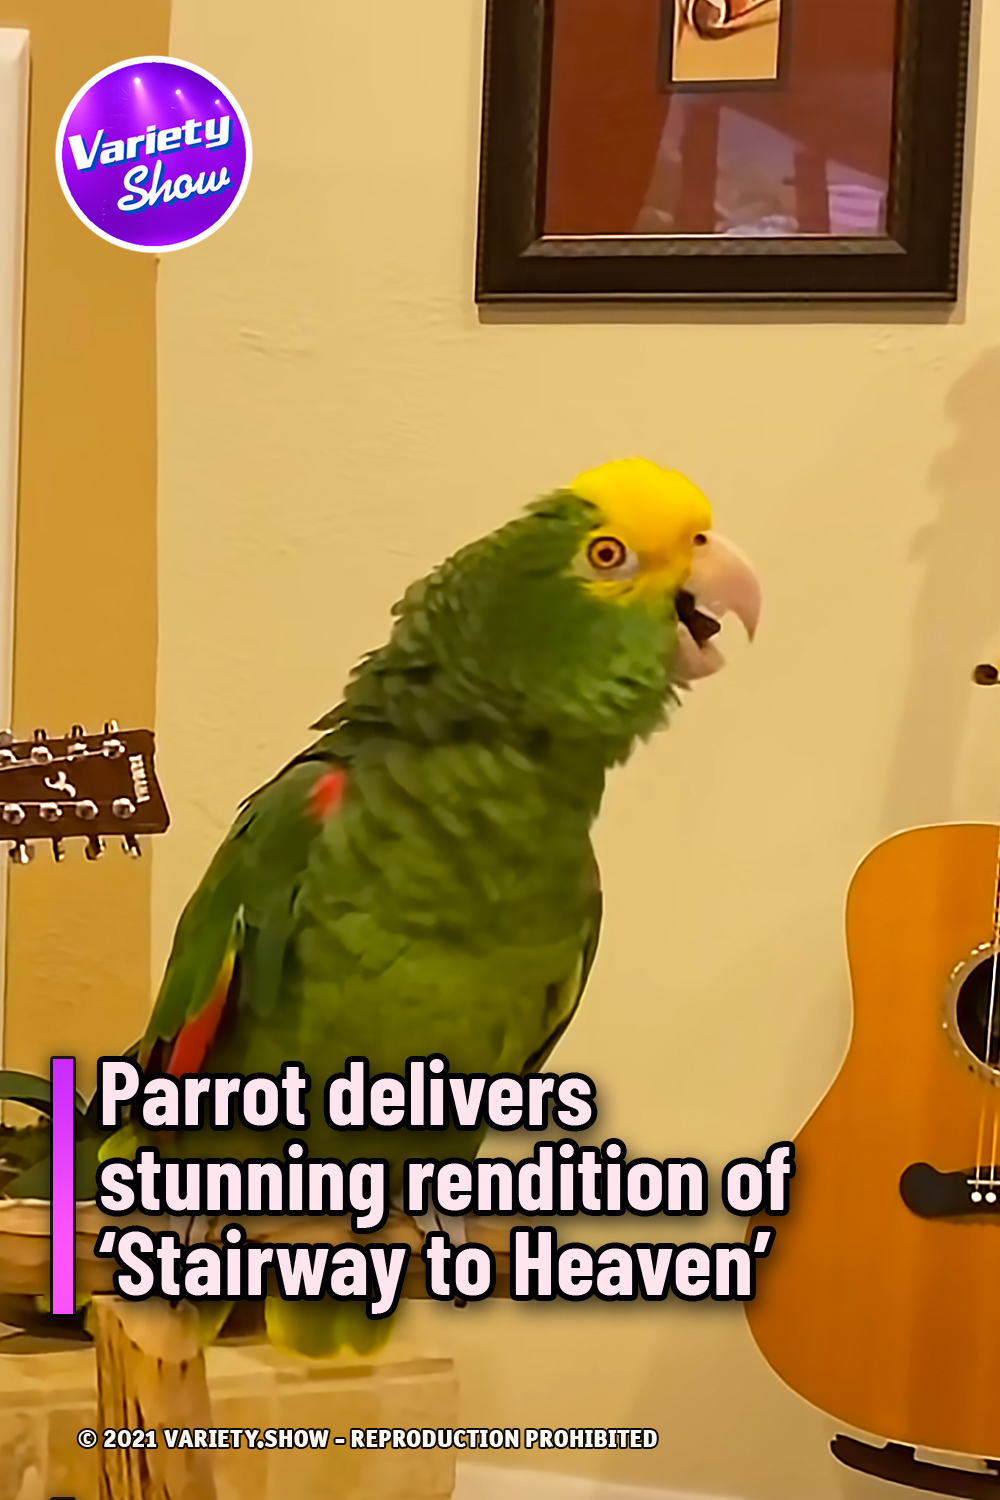 Parrot delivers stunning rendition of ‘Stairway to Heaven’